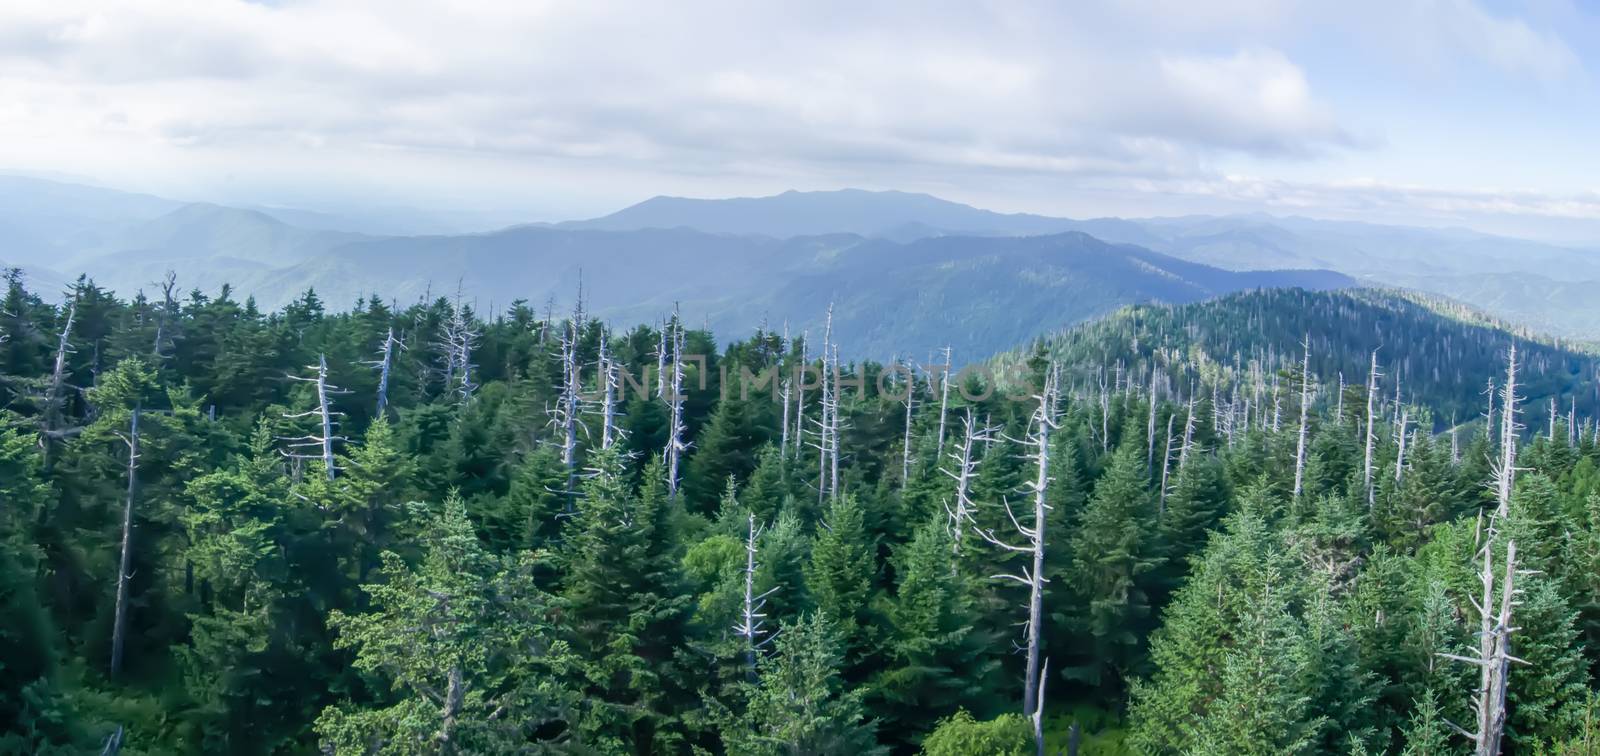 View from Clingman's Dome in the Great Smoky Mountains National Park near Gatlinburg, Tennessee.